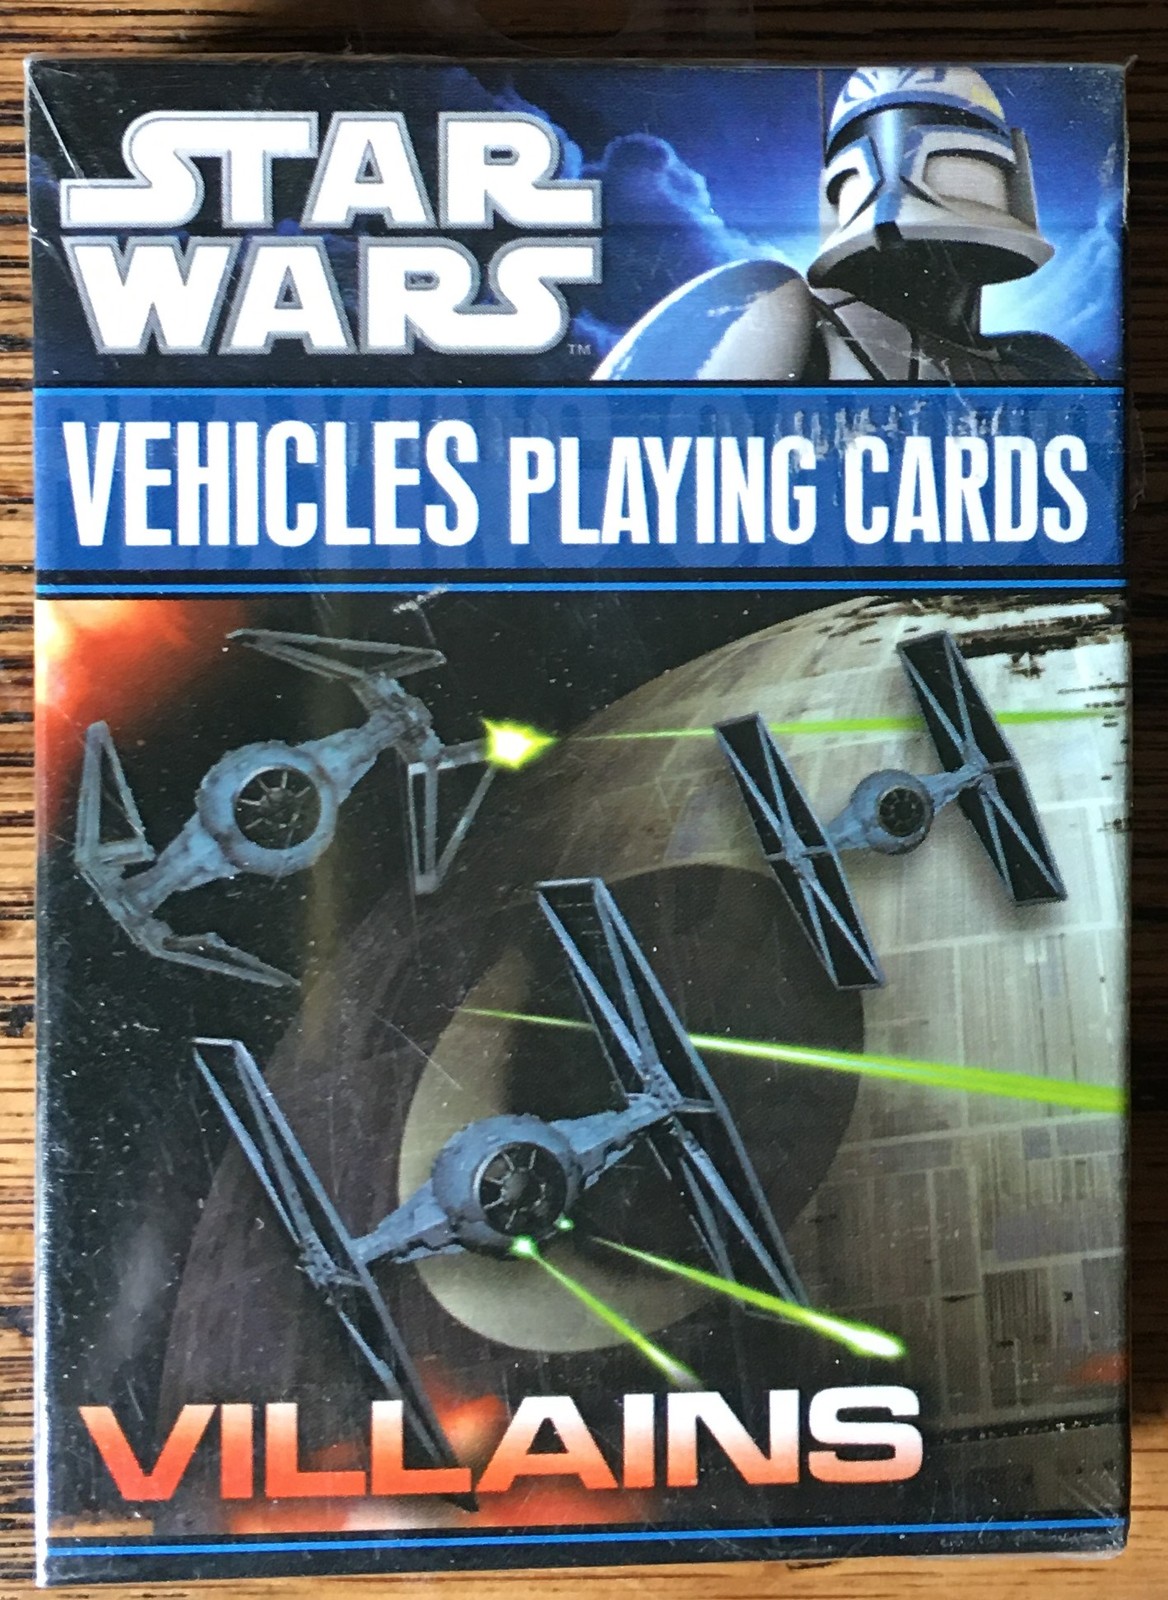 Star Wars Vehicles Playing Cards: Villains - New